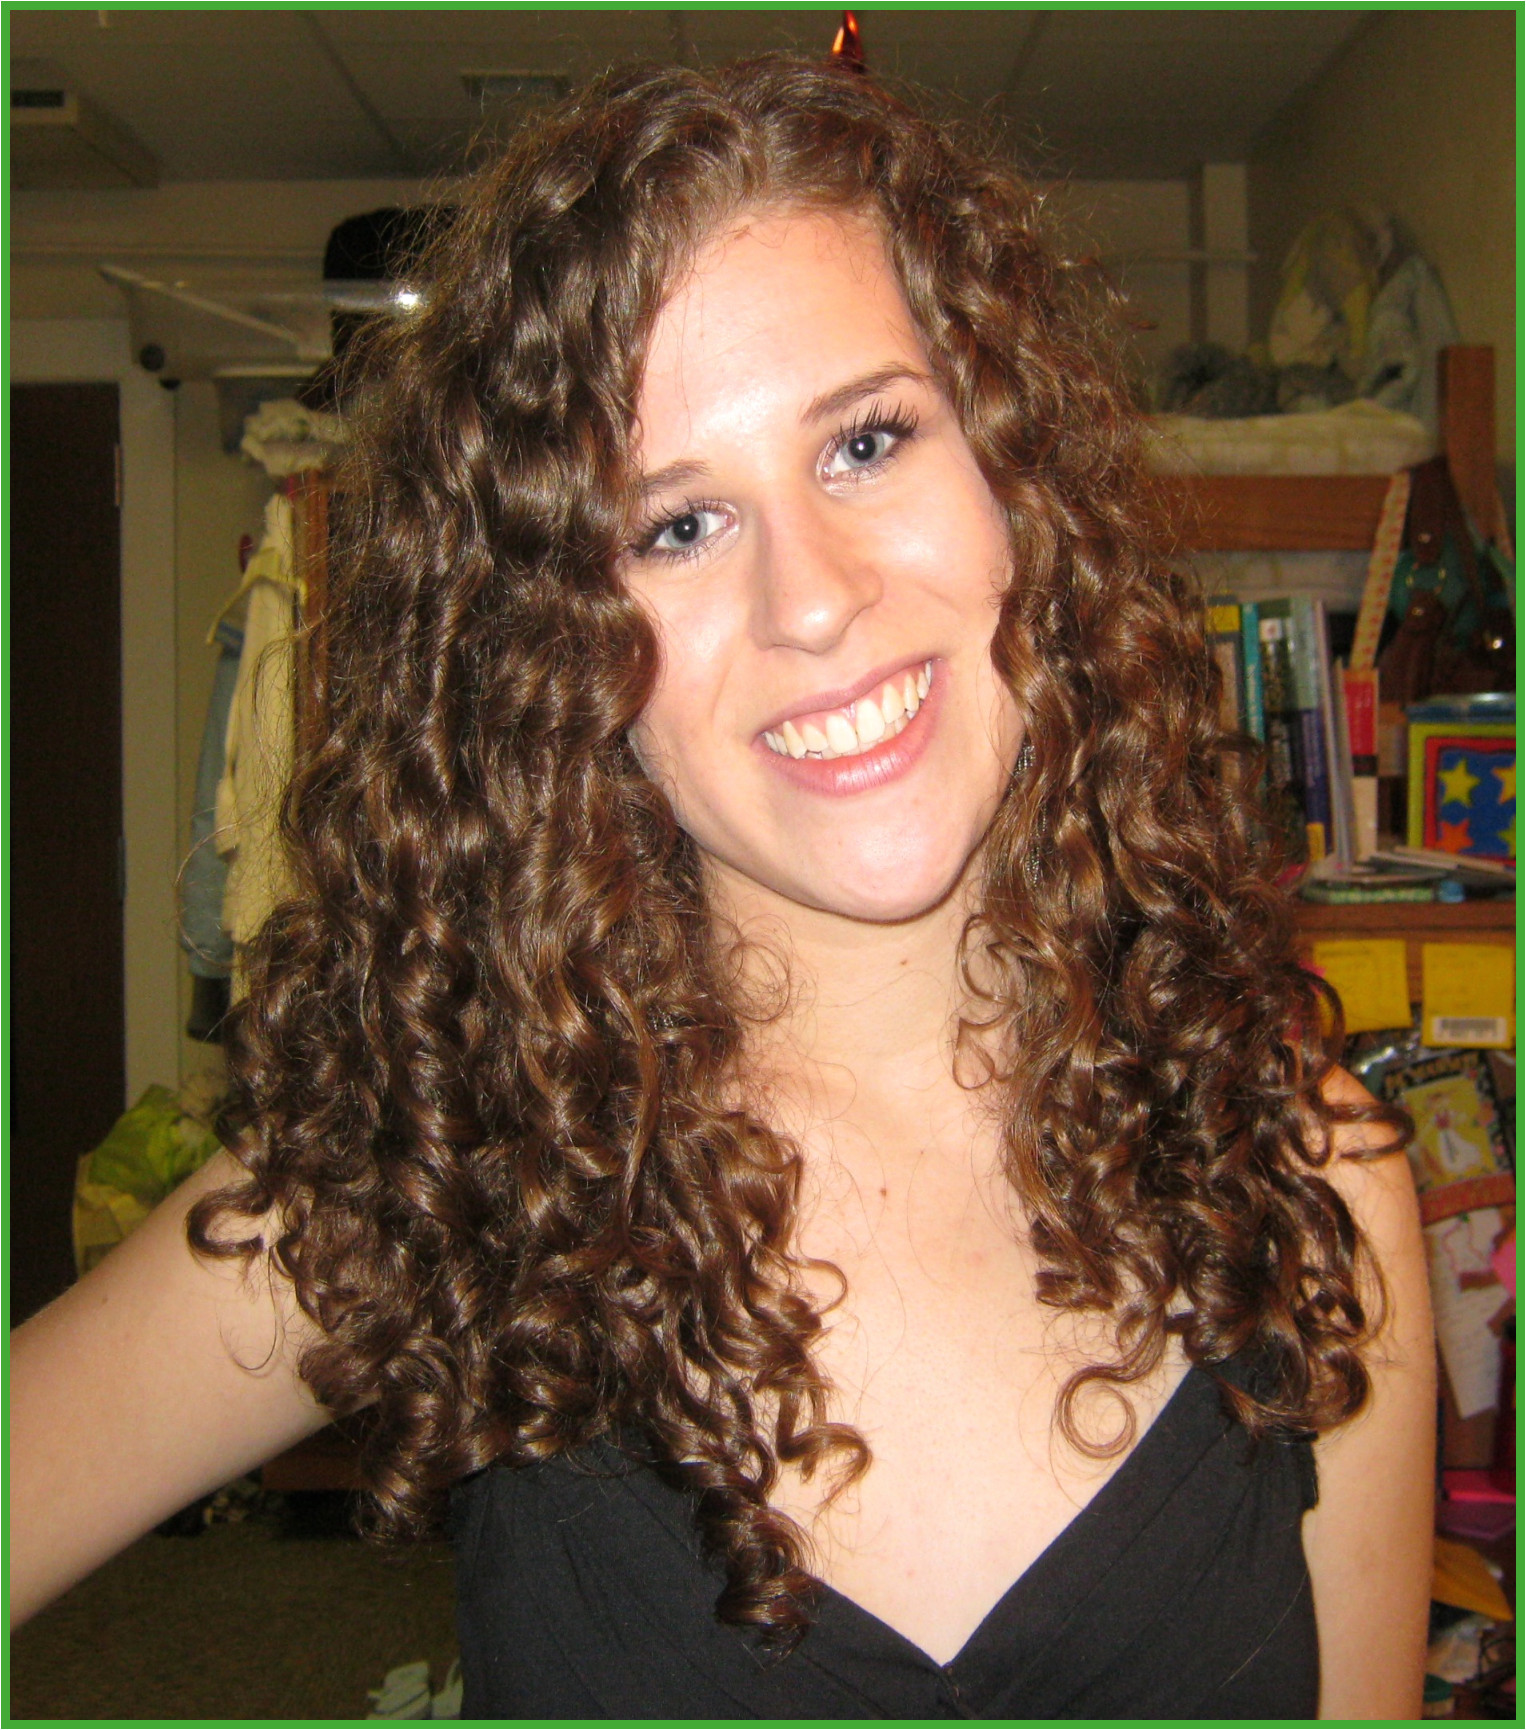 Cute Curly Hairstyles s Exciting Very Curly Hairstyles Fresh Curly Hair 0d Archives Hair Cute